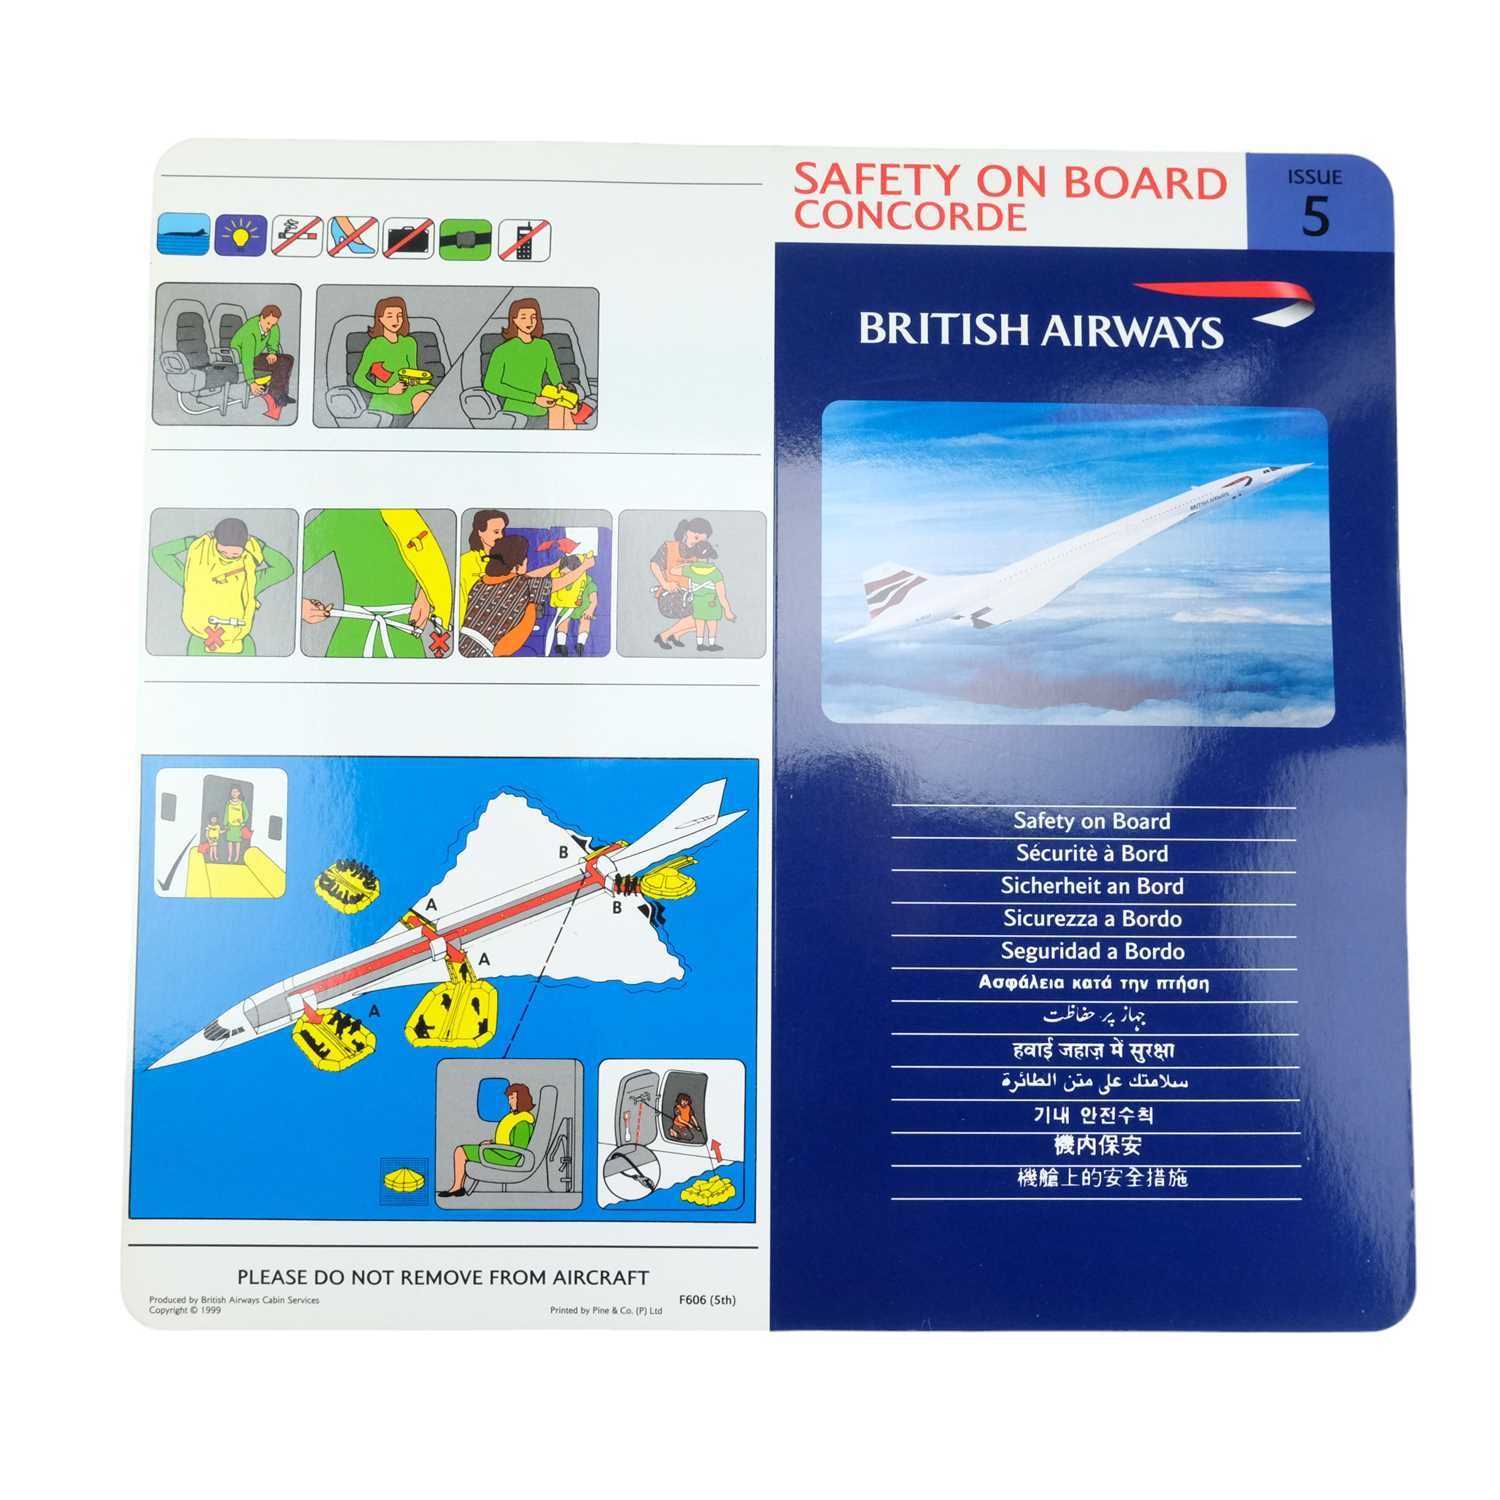 Five British Airways Concorde "Safety on Board" 1999 issue 5 safety cards - Image 2 of 2